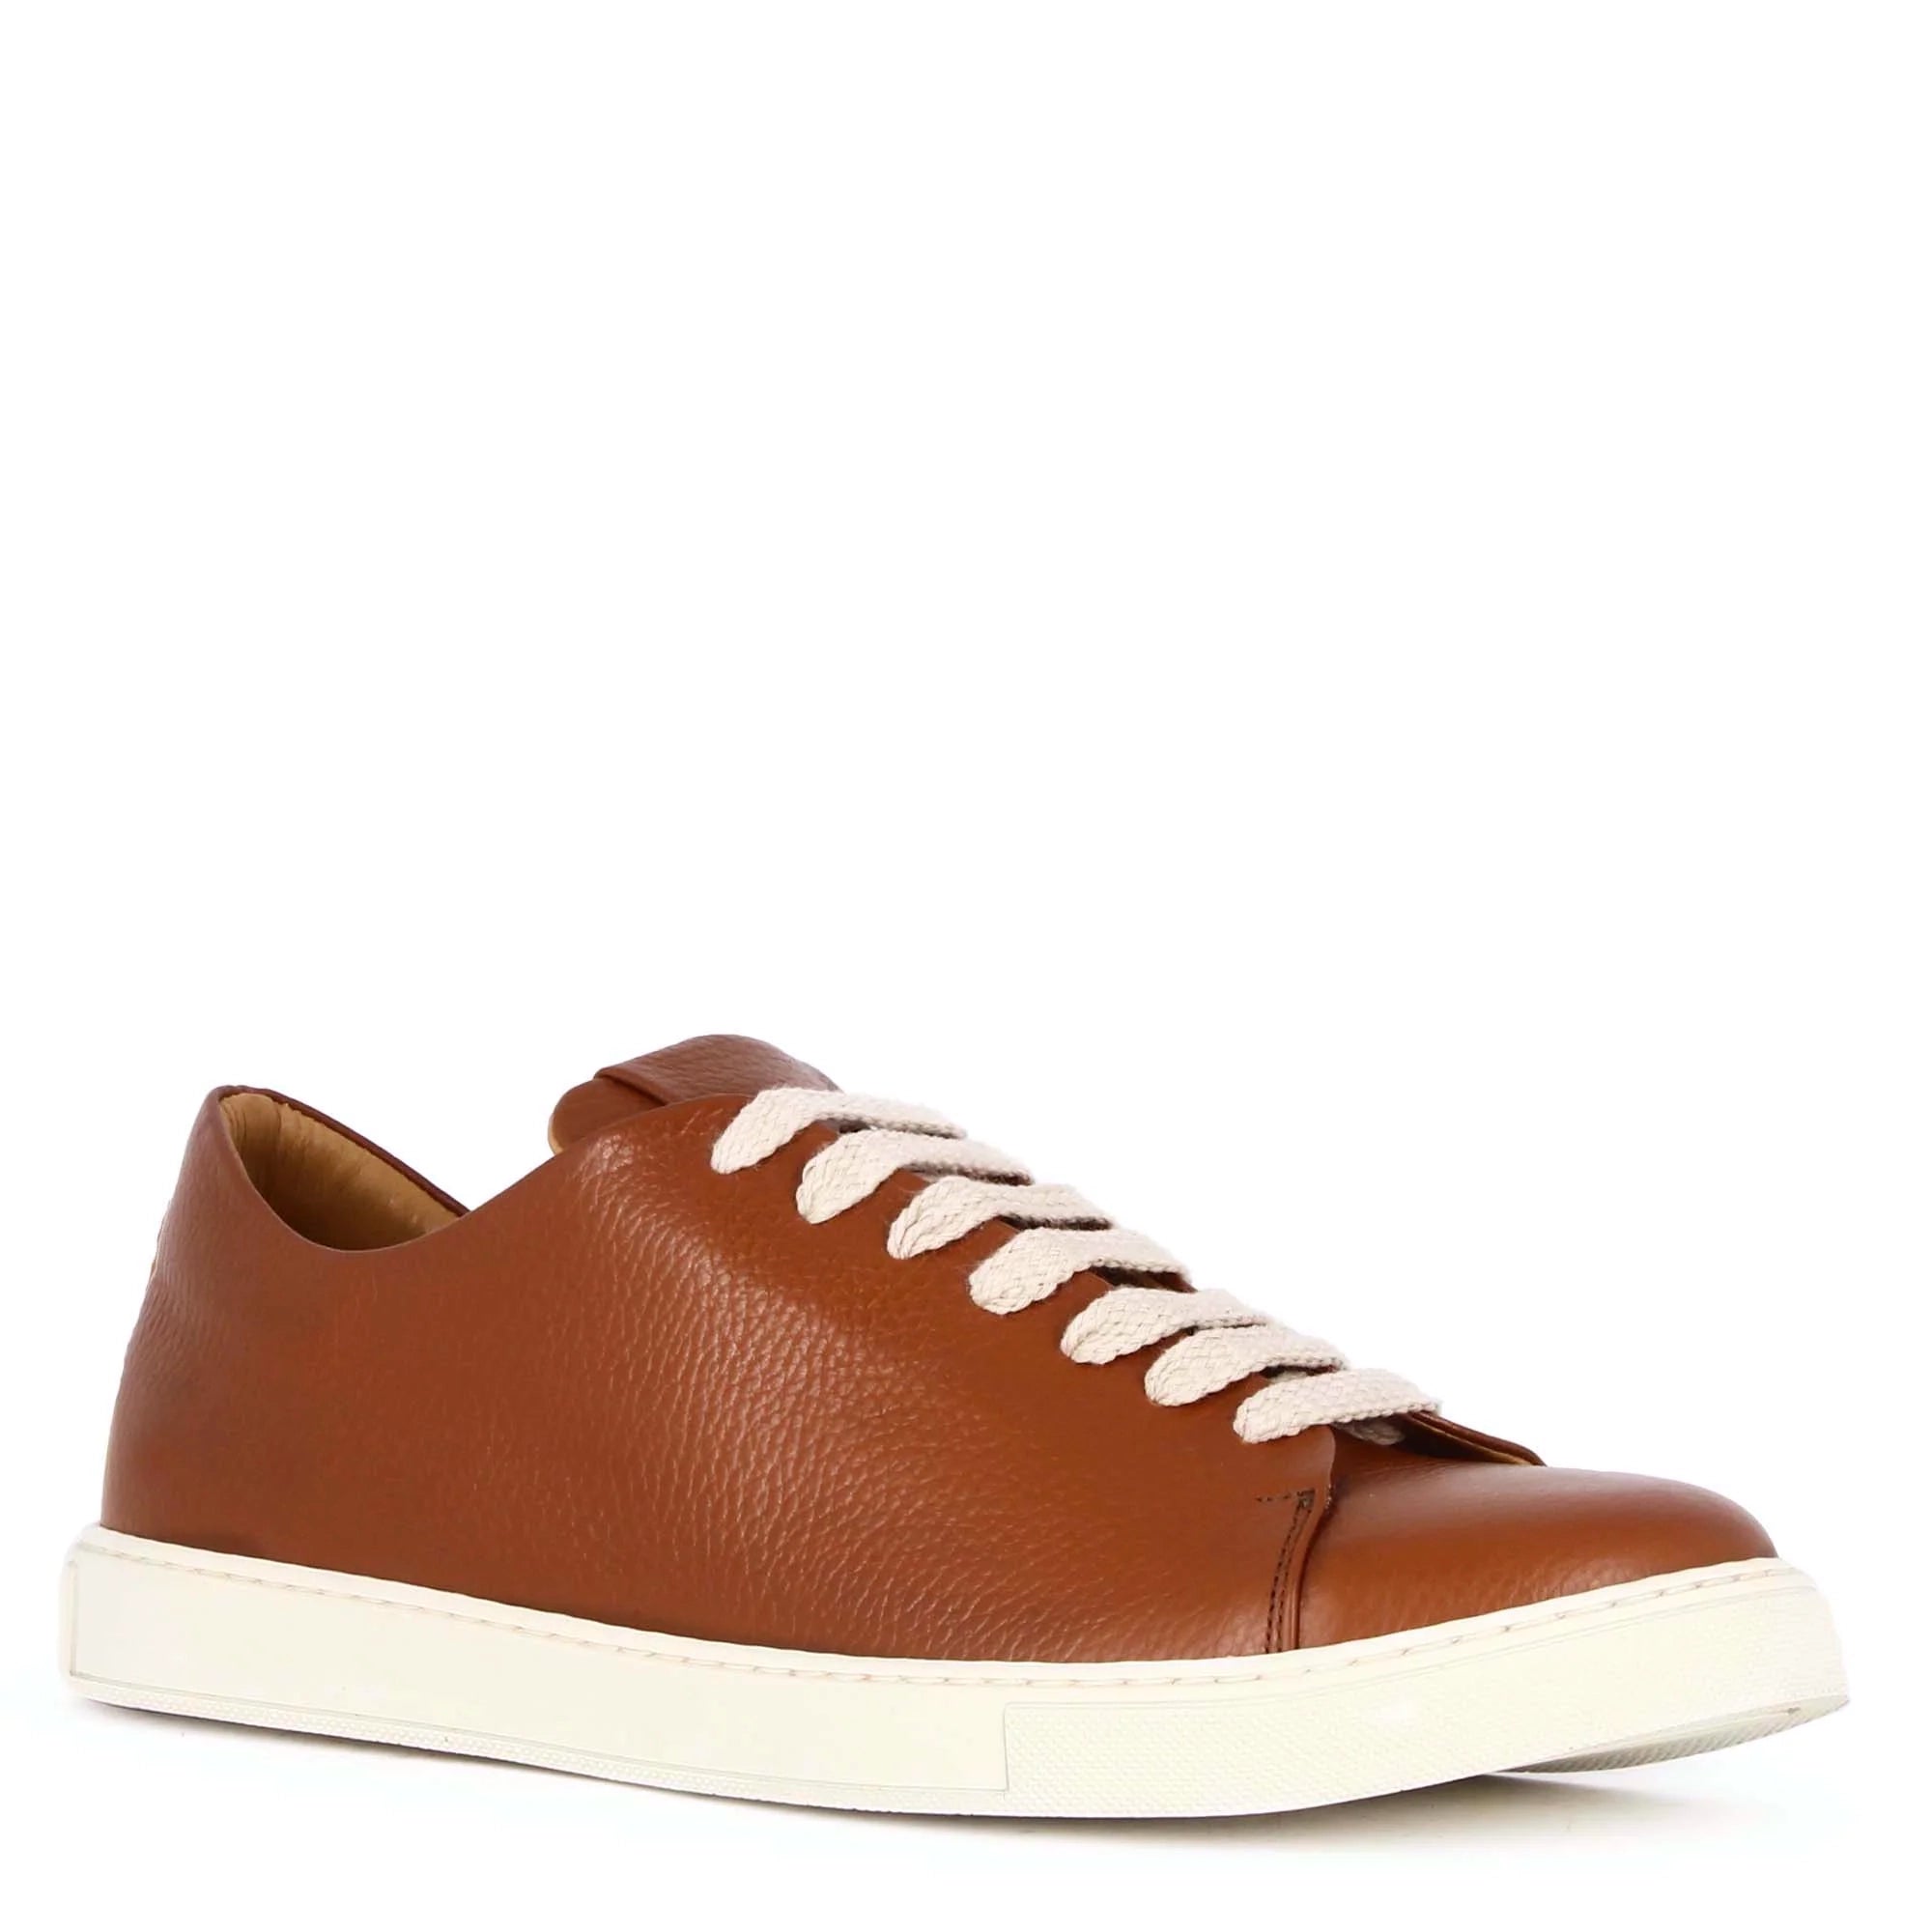 Classic Brown Leather Sneaker